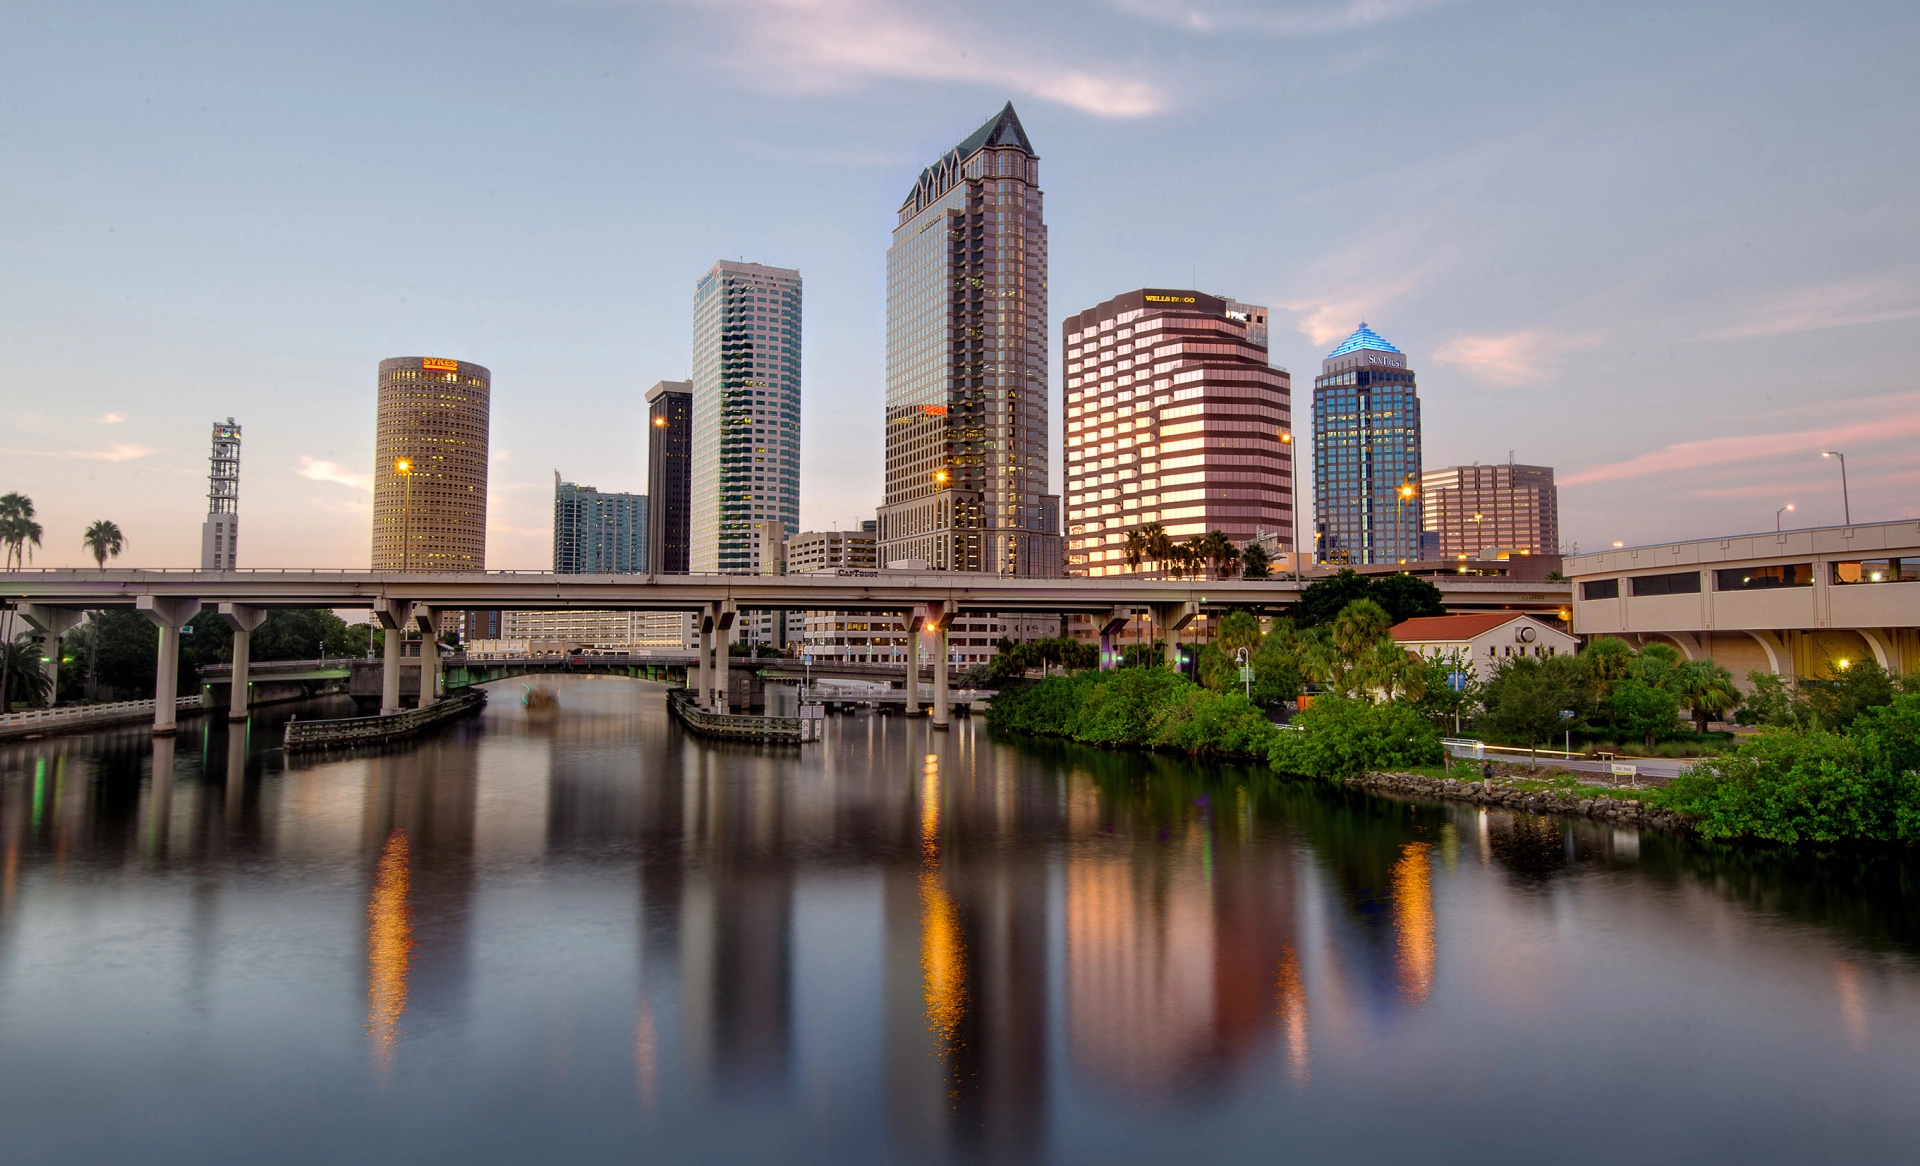 A picture of the city of Tampa at dusk